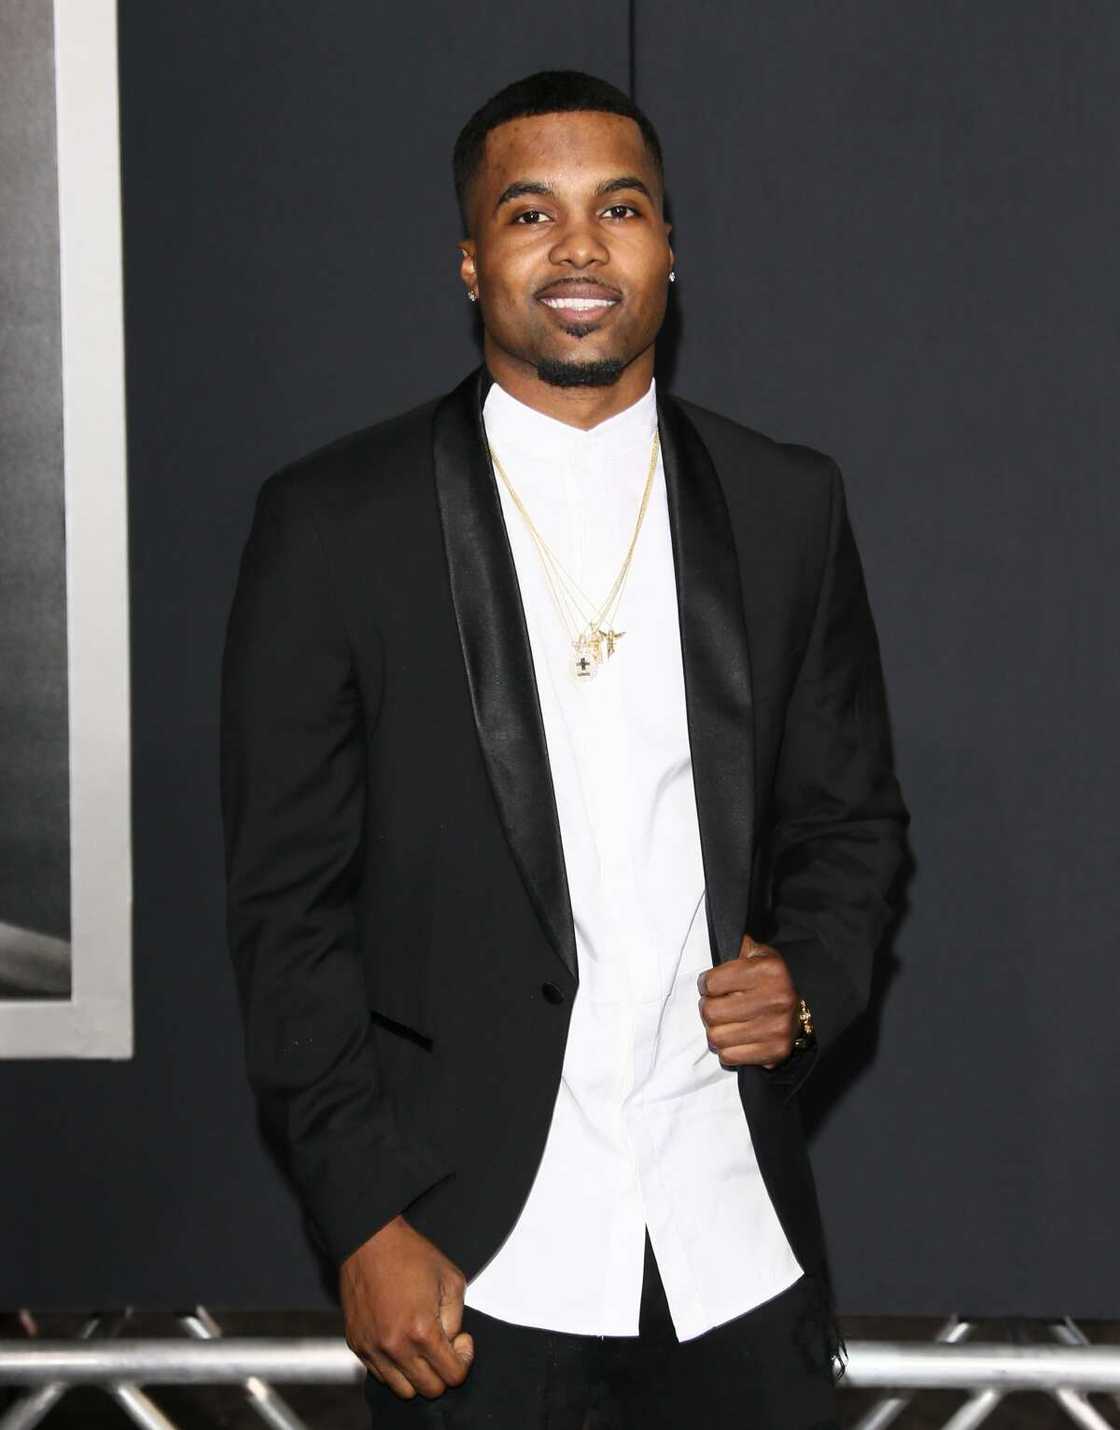 Who is Steelo Brim?